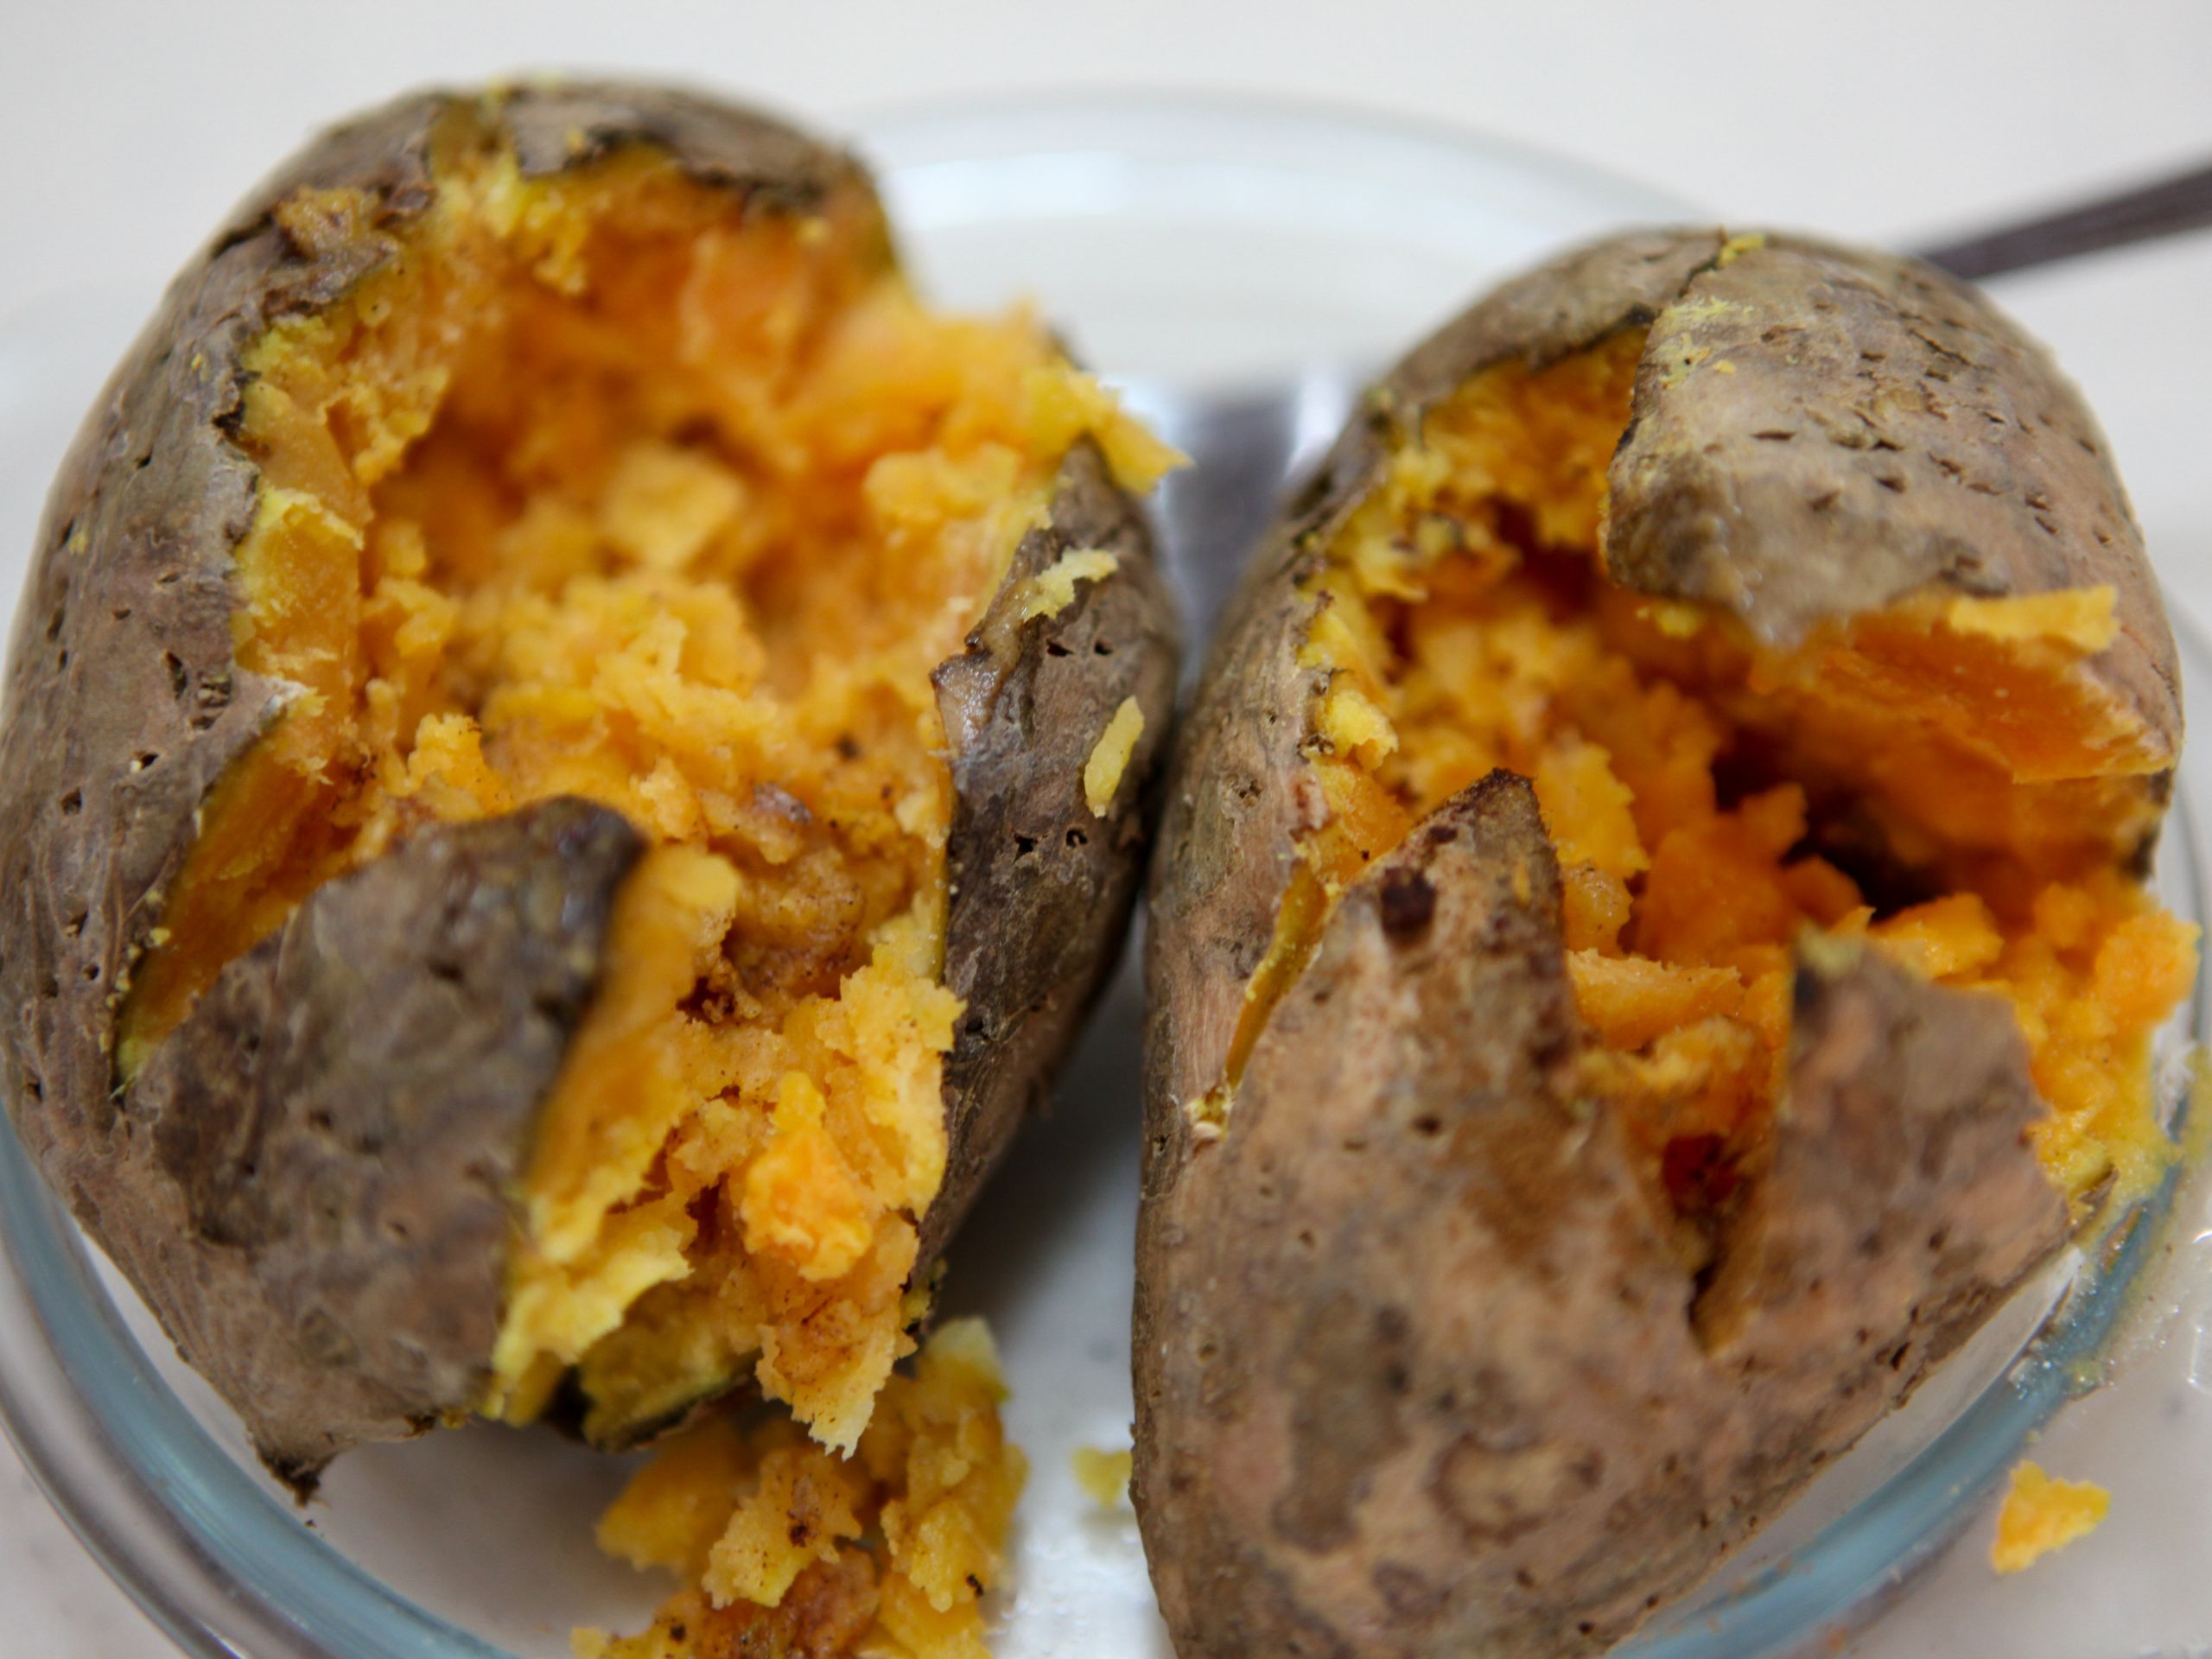 Cook Sweet Potato In Microwave
 How to Cook a Sweet Potato in the Microwave 11 Steps